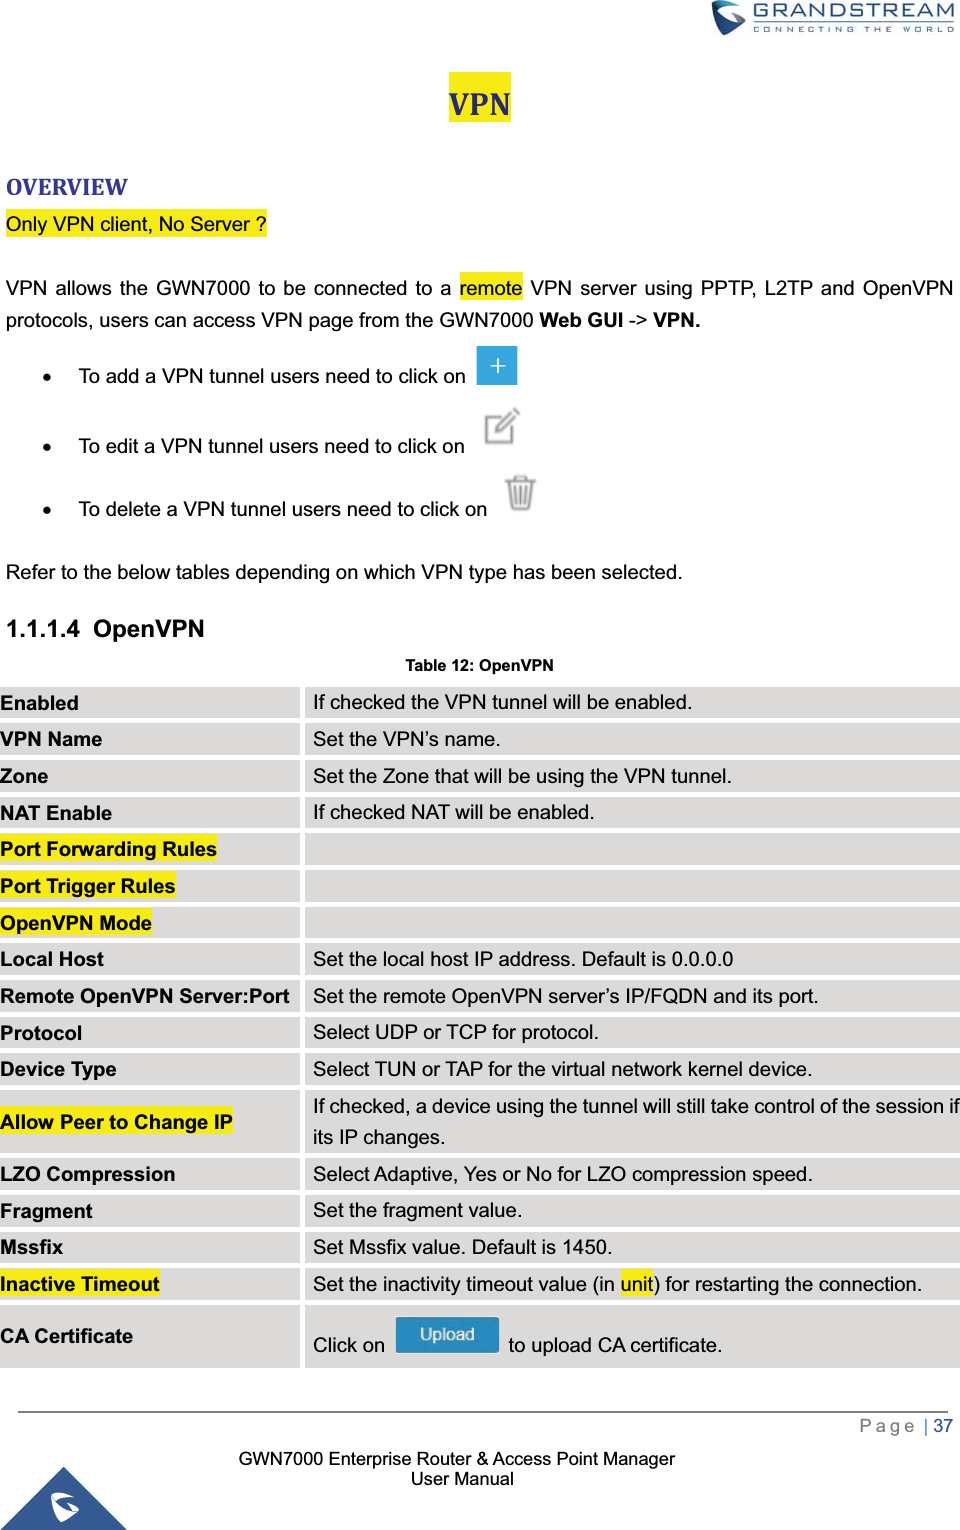 GWN7000 Enterprise Router &amp; Access Point ManagerUser ManualVPN OVERVIEW Only VPN client, No Server ?VPN allows the GWN7000 to be connected to a remote VPN server using PPTP, L2TP and OpenVPN protocols, users can access VPN page from the GWN7000 Web GUI -&gt; VPN.xTo add a VPN tunnel users need to click on xTo edit a VPN tunnel users need to click on xTo delete a VPN tunnel users need to click on Refer to the below tables depending on which VPN type has been selected.1.1.1.4 OpenVPNTable 12: OpenVPNEnabled If checked the VPN tunnel will be enabled.VPN Name Set the VPN’s name.Zone Set the Zone that will be using the VPN tunnel.NAT Enable If checked NAT will be enabled.Port Forwarding RulesPort Trigger RulesOpenVPN ModeLocal Host Set the local host IP address. Default is 0.0.0.0Remote OpenVPN Server:Port Set the remote OpenVPN server’s IP/FQDN and its port.Protocol Select UDP or TCP for protocol.Device Type Select TUN or TAP for the virtual network kernel device.Allow Peer to Change IP If checked, a device using the tunnel will still take control of the session if its IP changes.LZO Compression Select Adaptive, Yes or No for LZO compression speed.Fragment Set the fragment value.Mssfix Set Mssfix value. Default is 1450.Inactive Timeout Set the inactivity timeout value (in unit) for restarting the connection.CA Certificate Click on  to upload CA certificate.Page |37